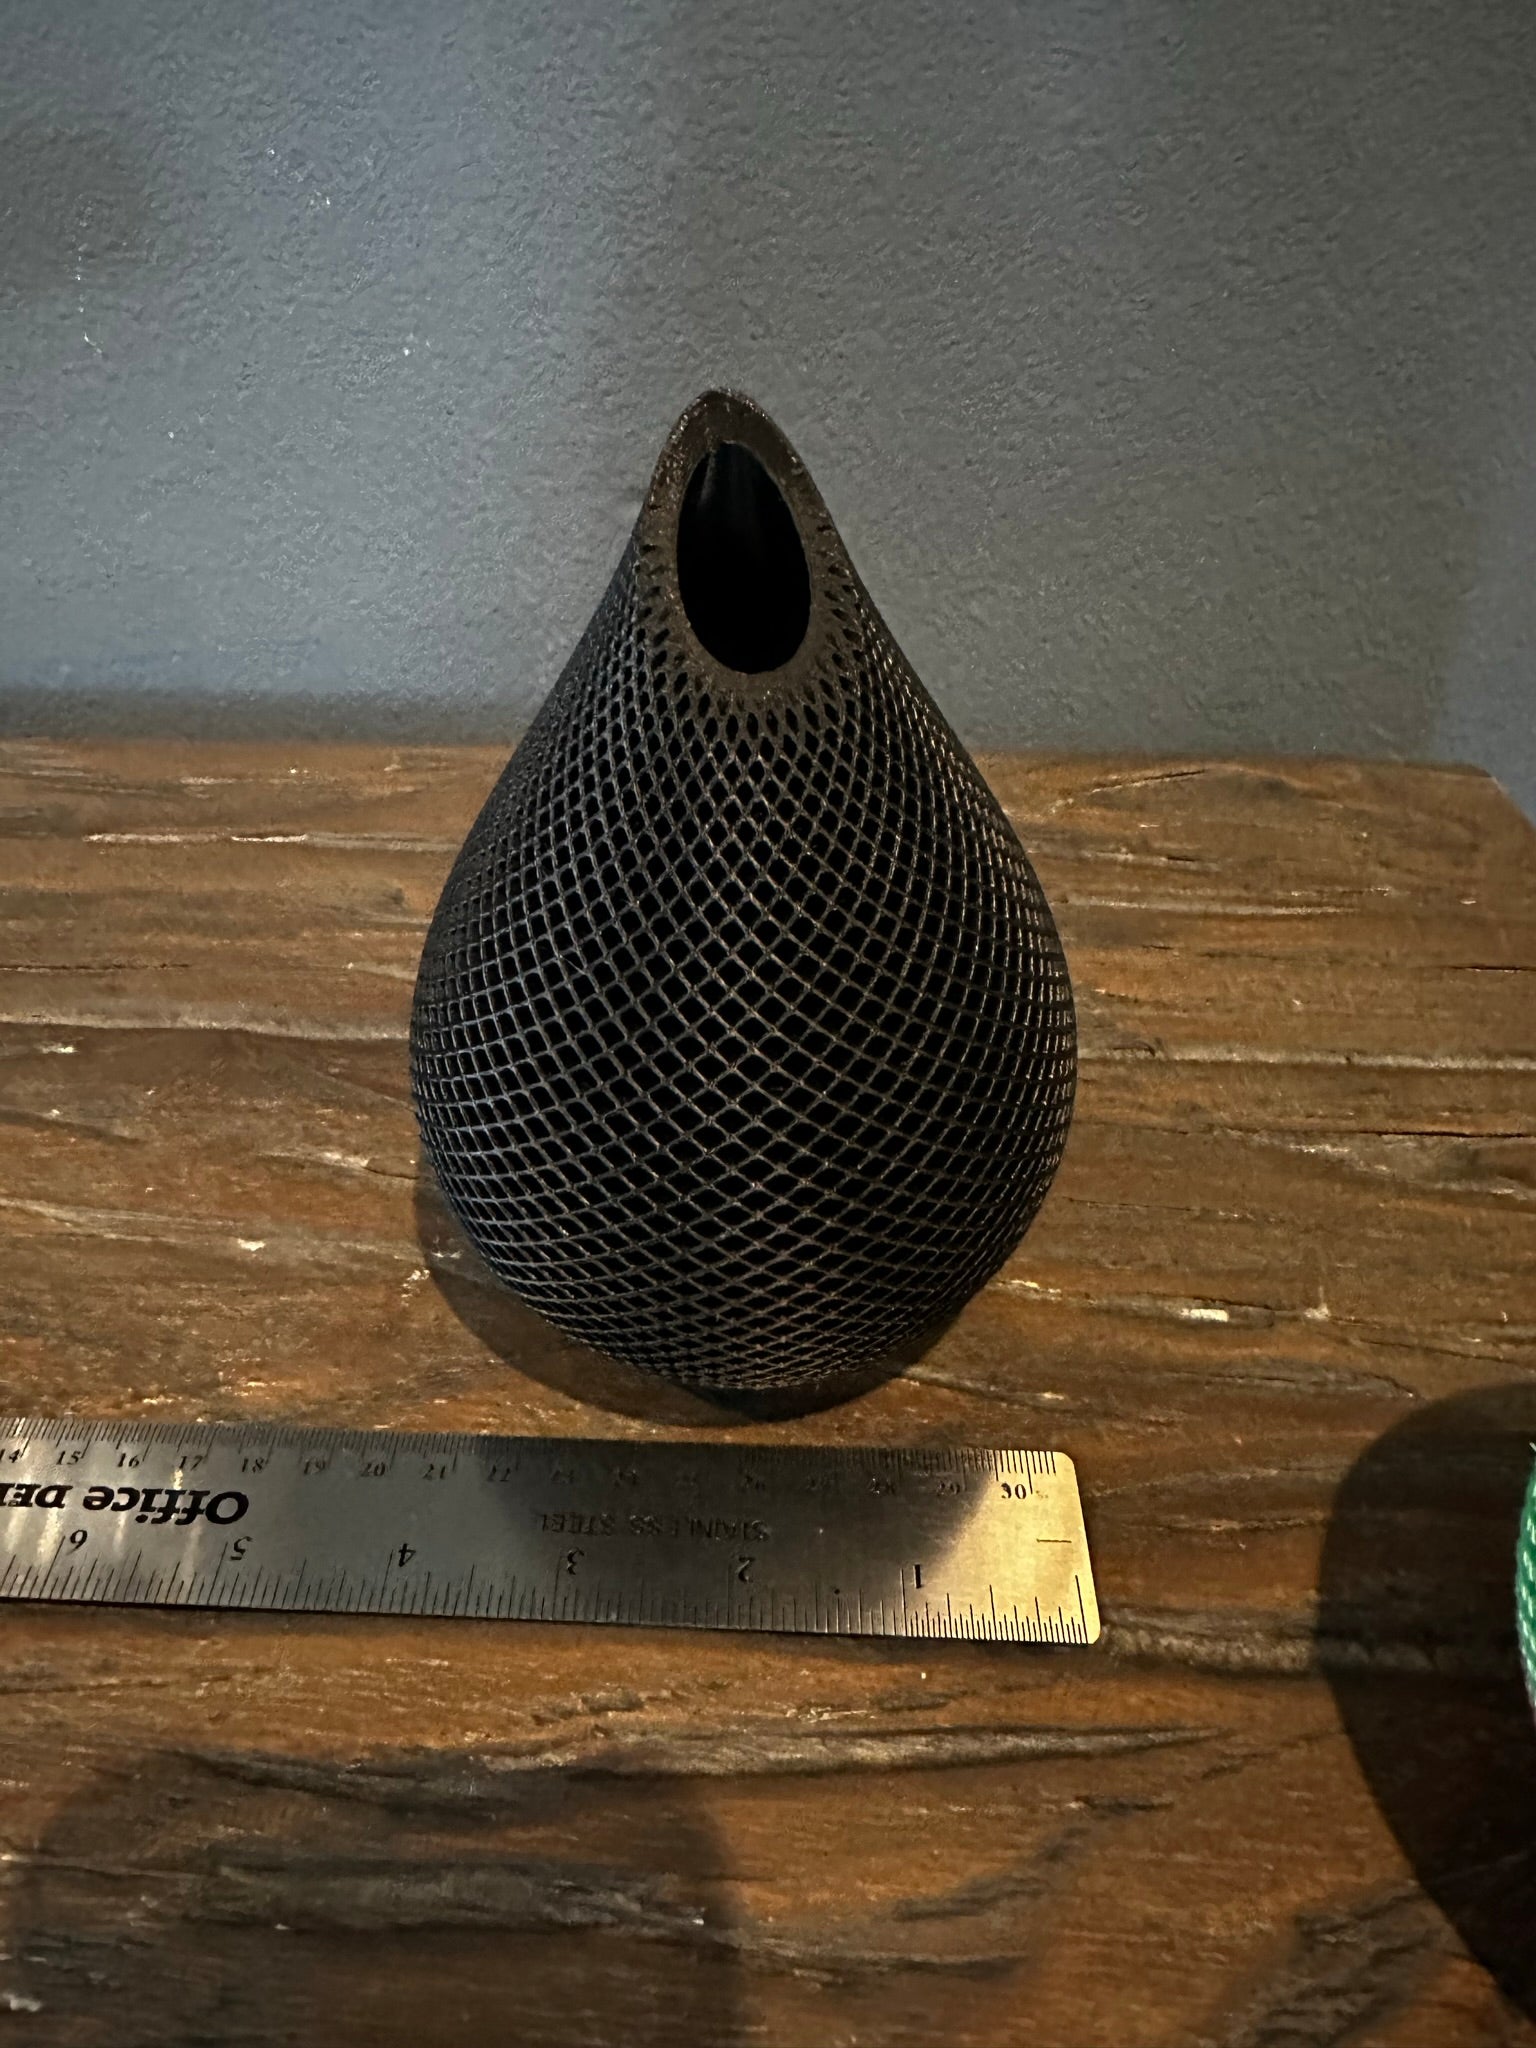 Photo of Handmade 3D Printed Vase in Black Color with Mesh Pattern showing its measurements of approximately 4 inches wide